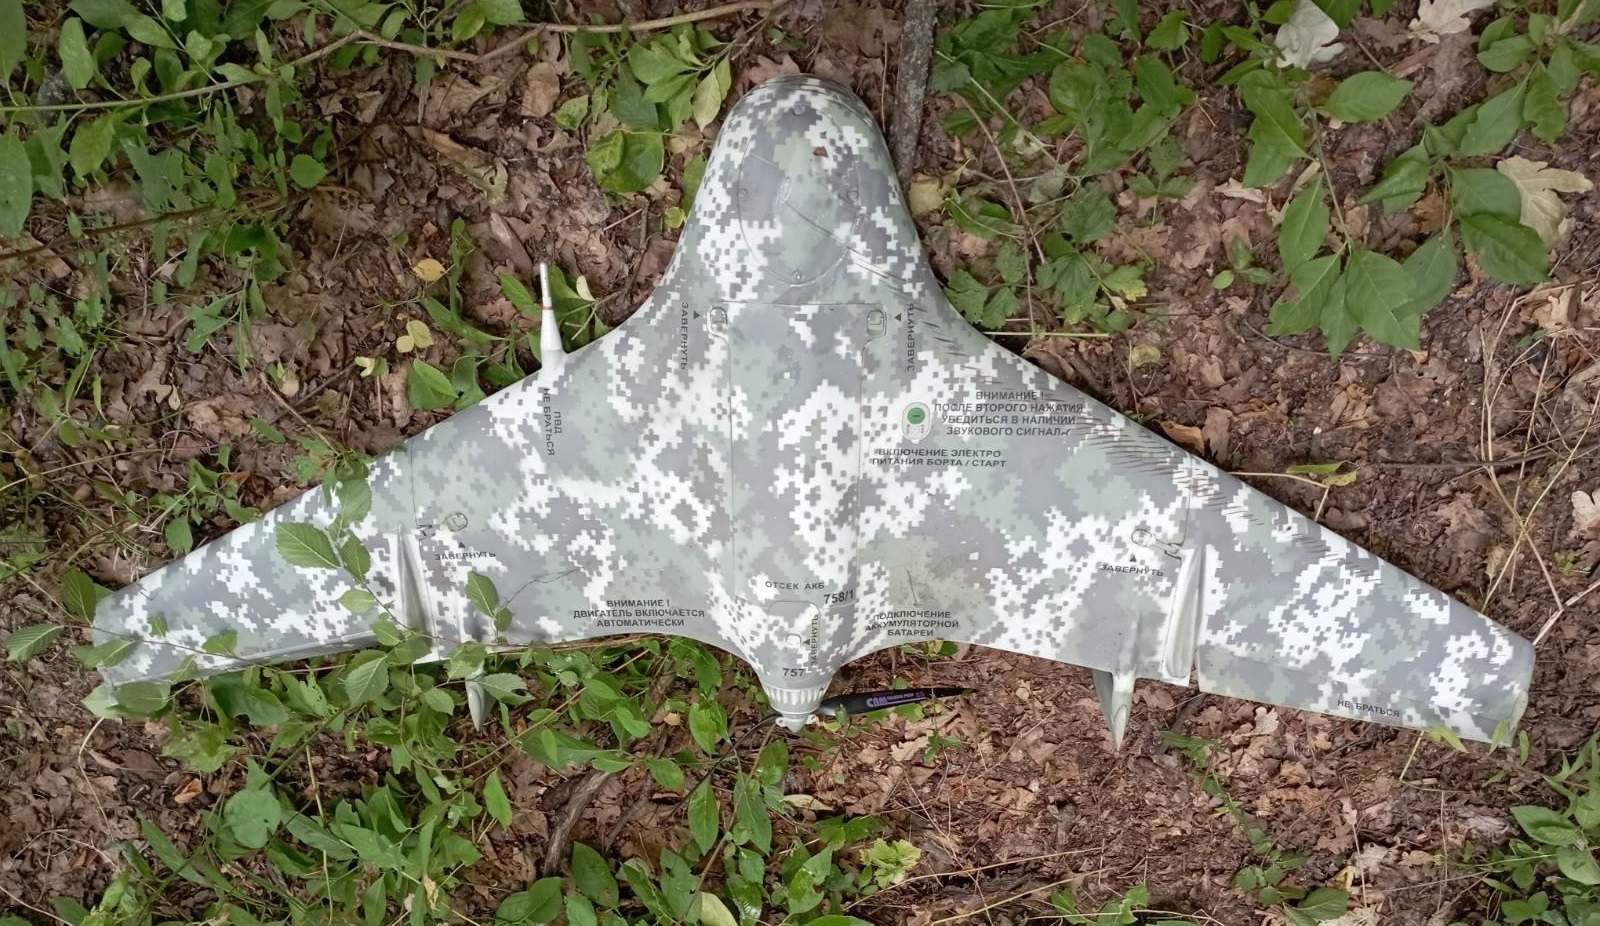 Ukrainian paratroopers destroyed the Russian drone "Eleron-3" with small arms